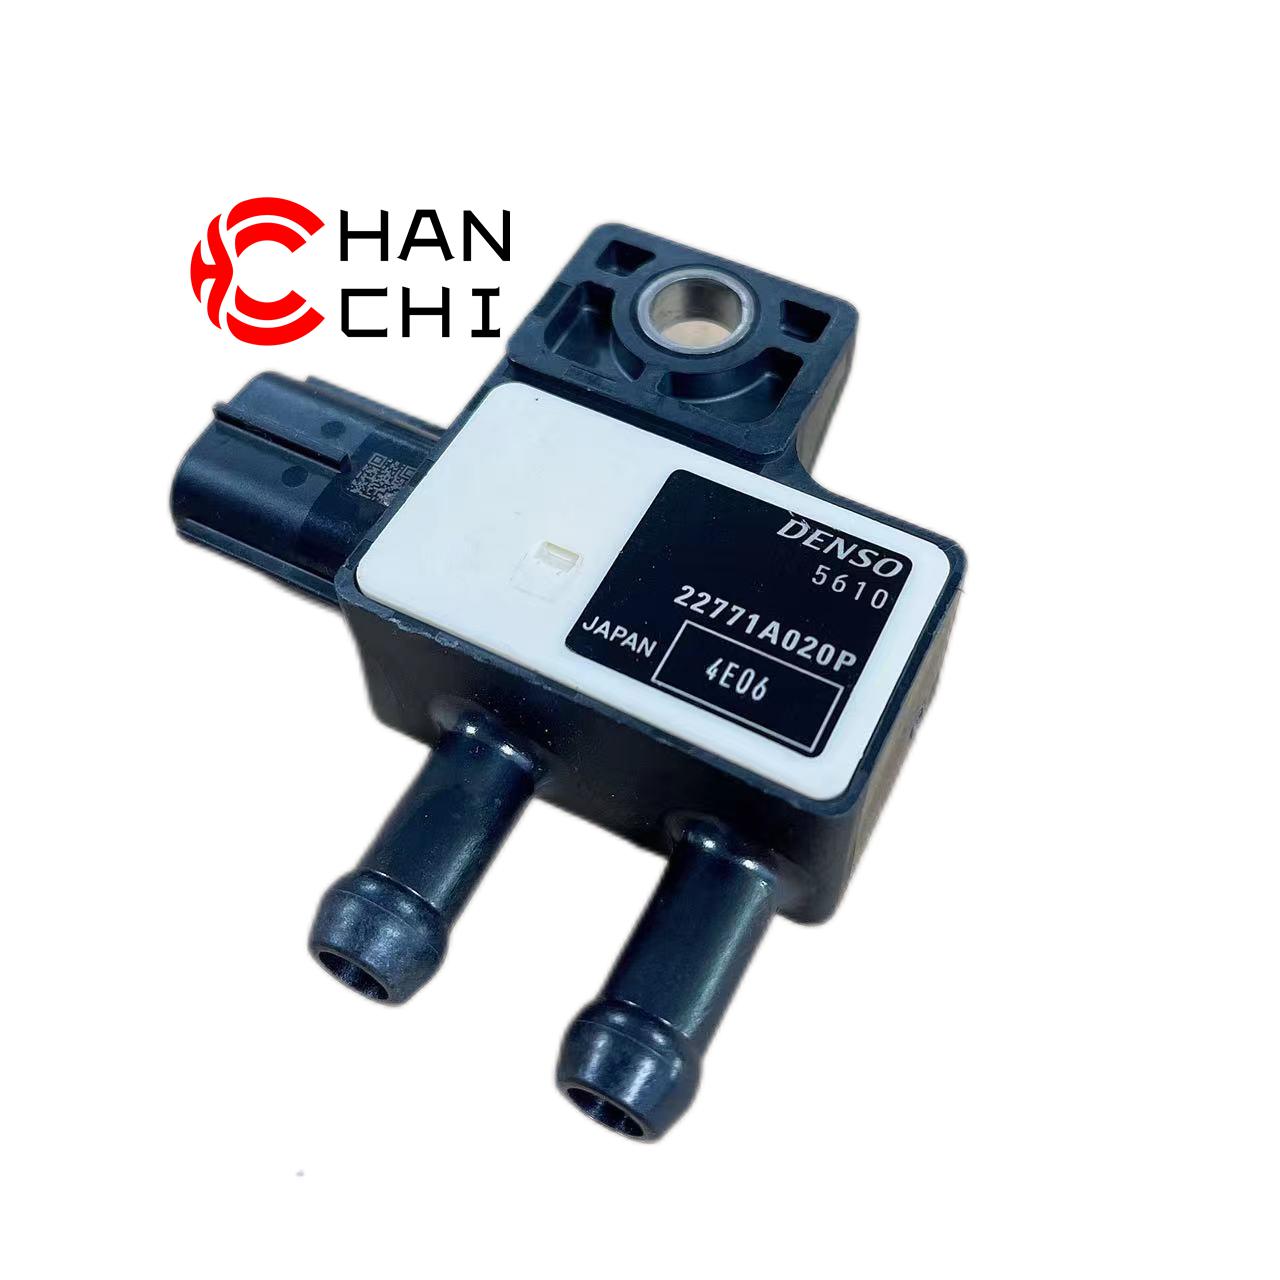 OEM: 22771A020PMaterial: ABSColor: blackOrigin: Made in ChinaWeight: 100gPacking List: 1* Diesel Particulate Filter Differential Pressure Sensor More ServiceWe can provide OEM Manufacturing serviceWe can Be your one-step solution for Auto PartsWe can provide technical scheme for you Feel Free to Contact Us, We will get back to you as soon as possible.